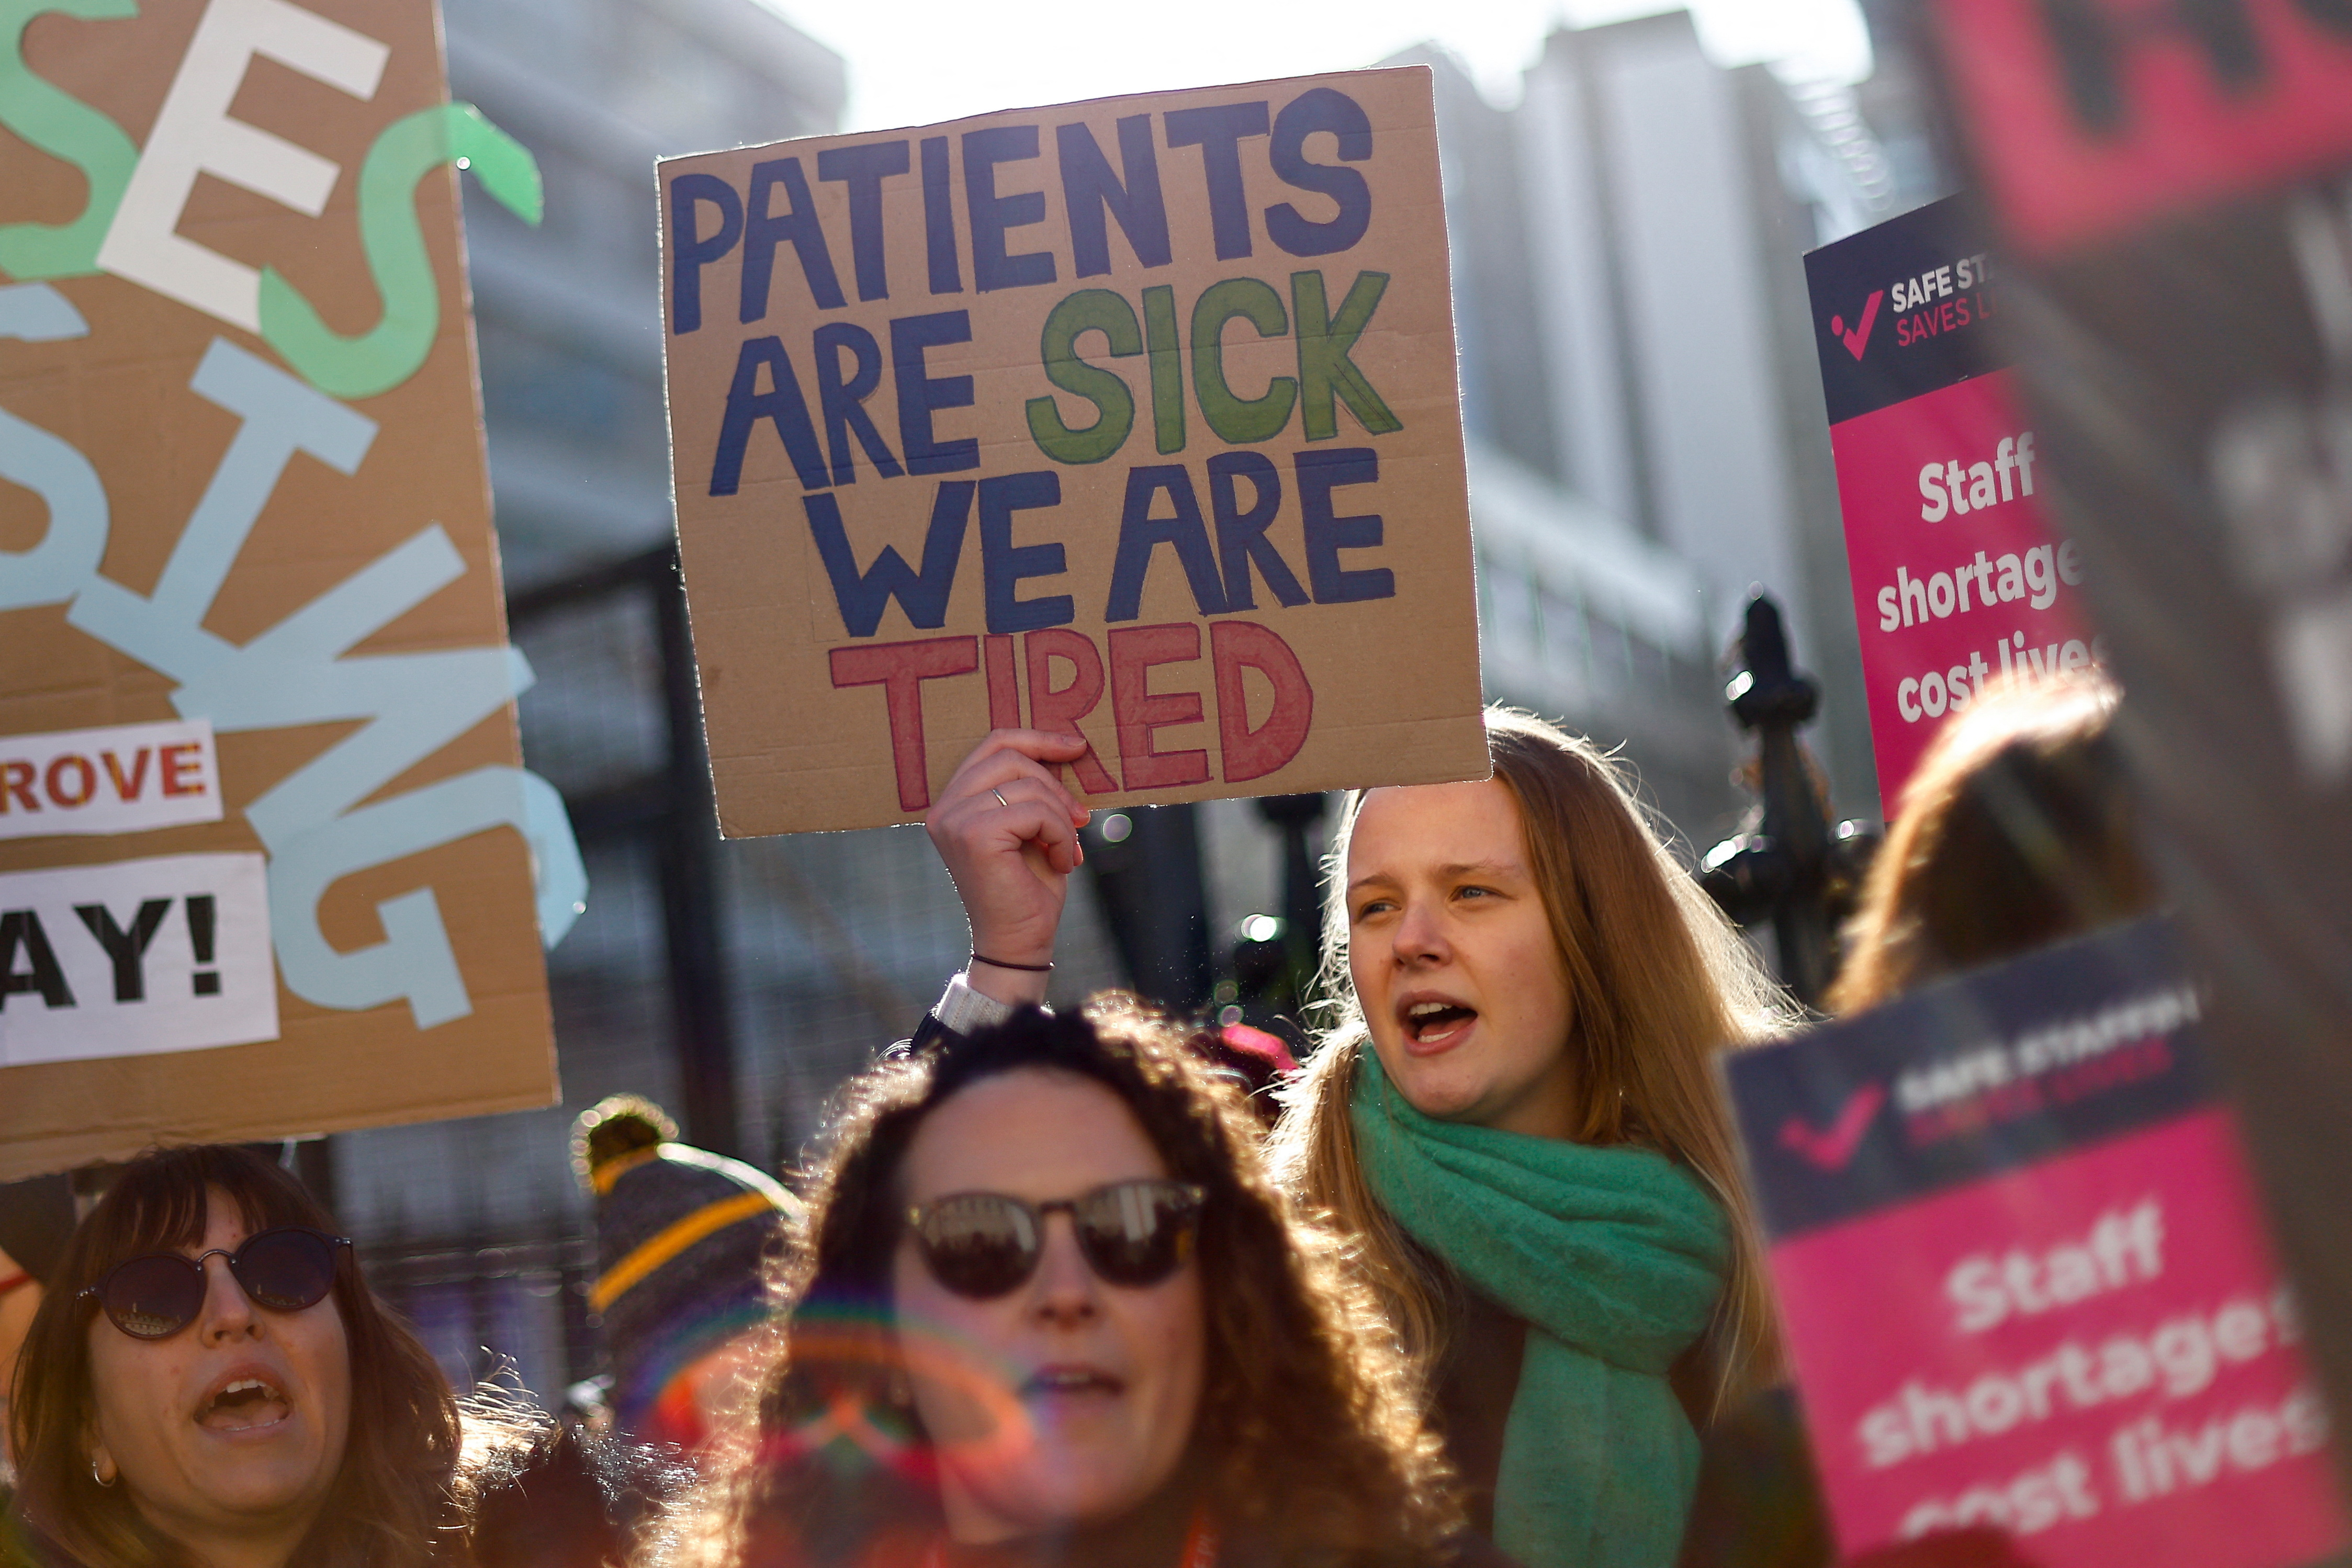 NHS nurses and other medical workers strike over pay, in London